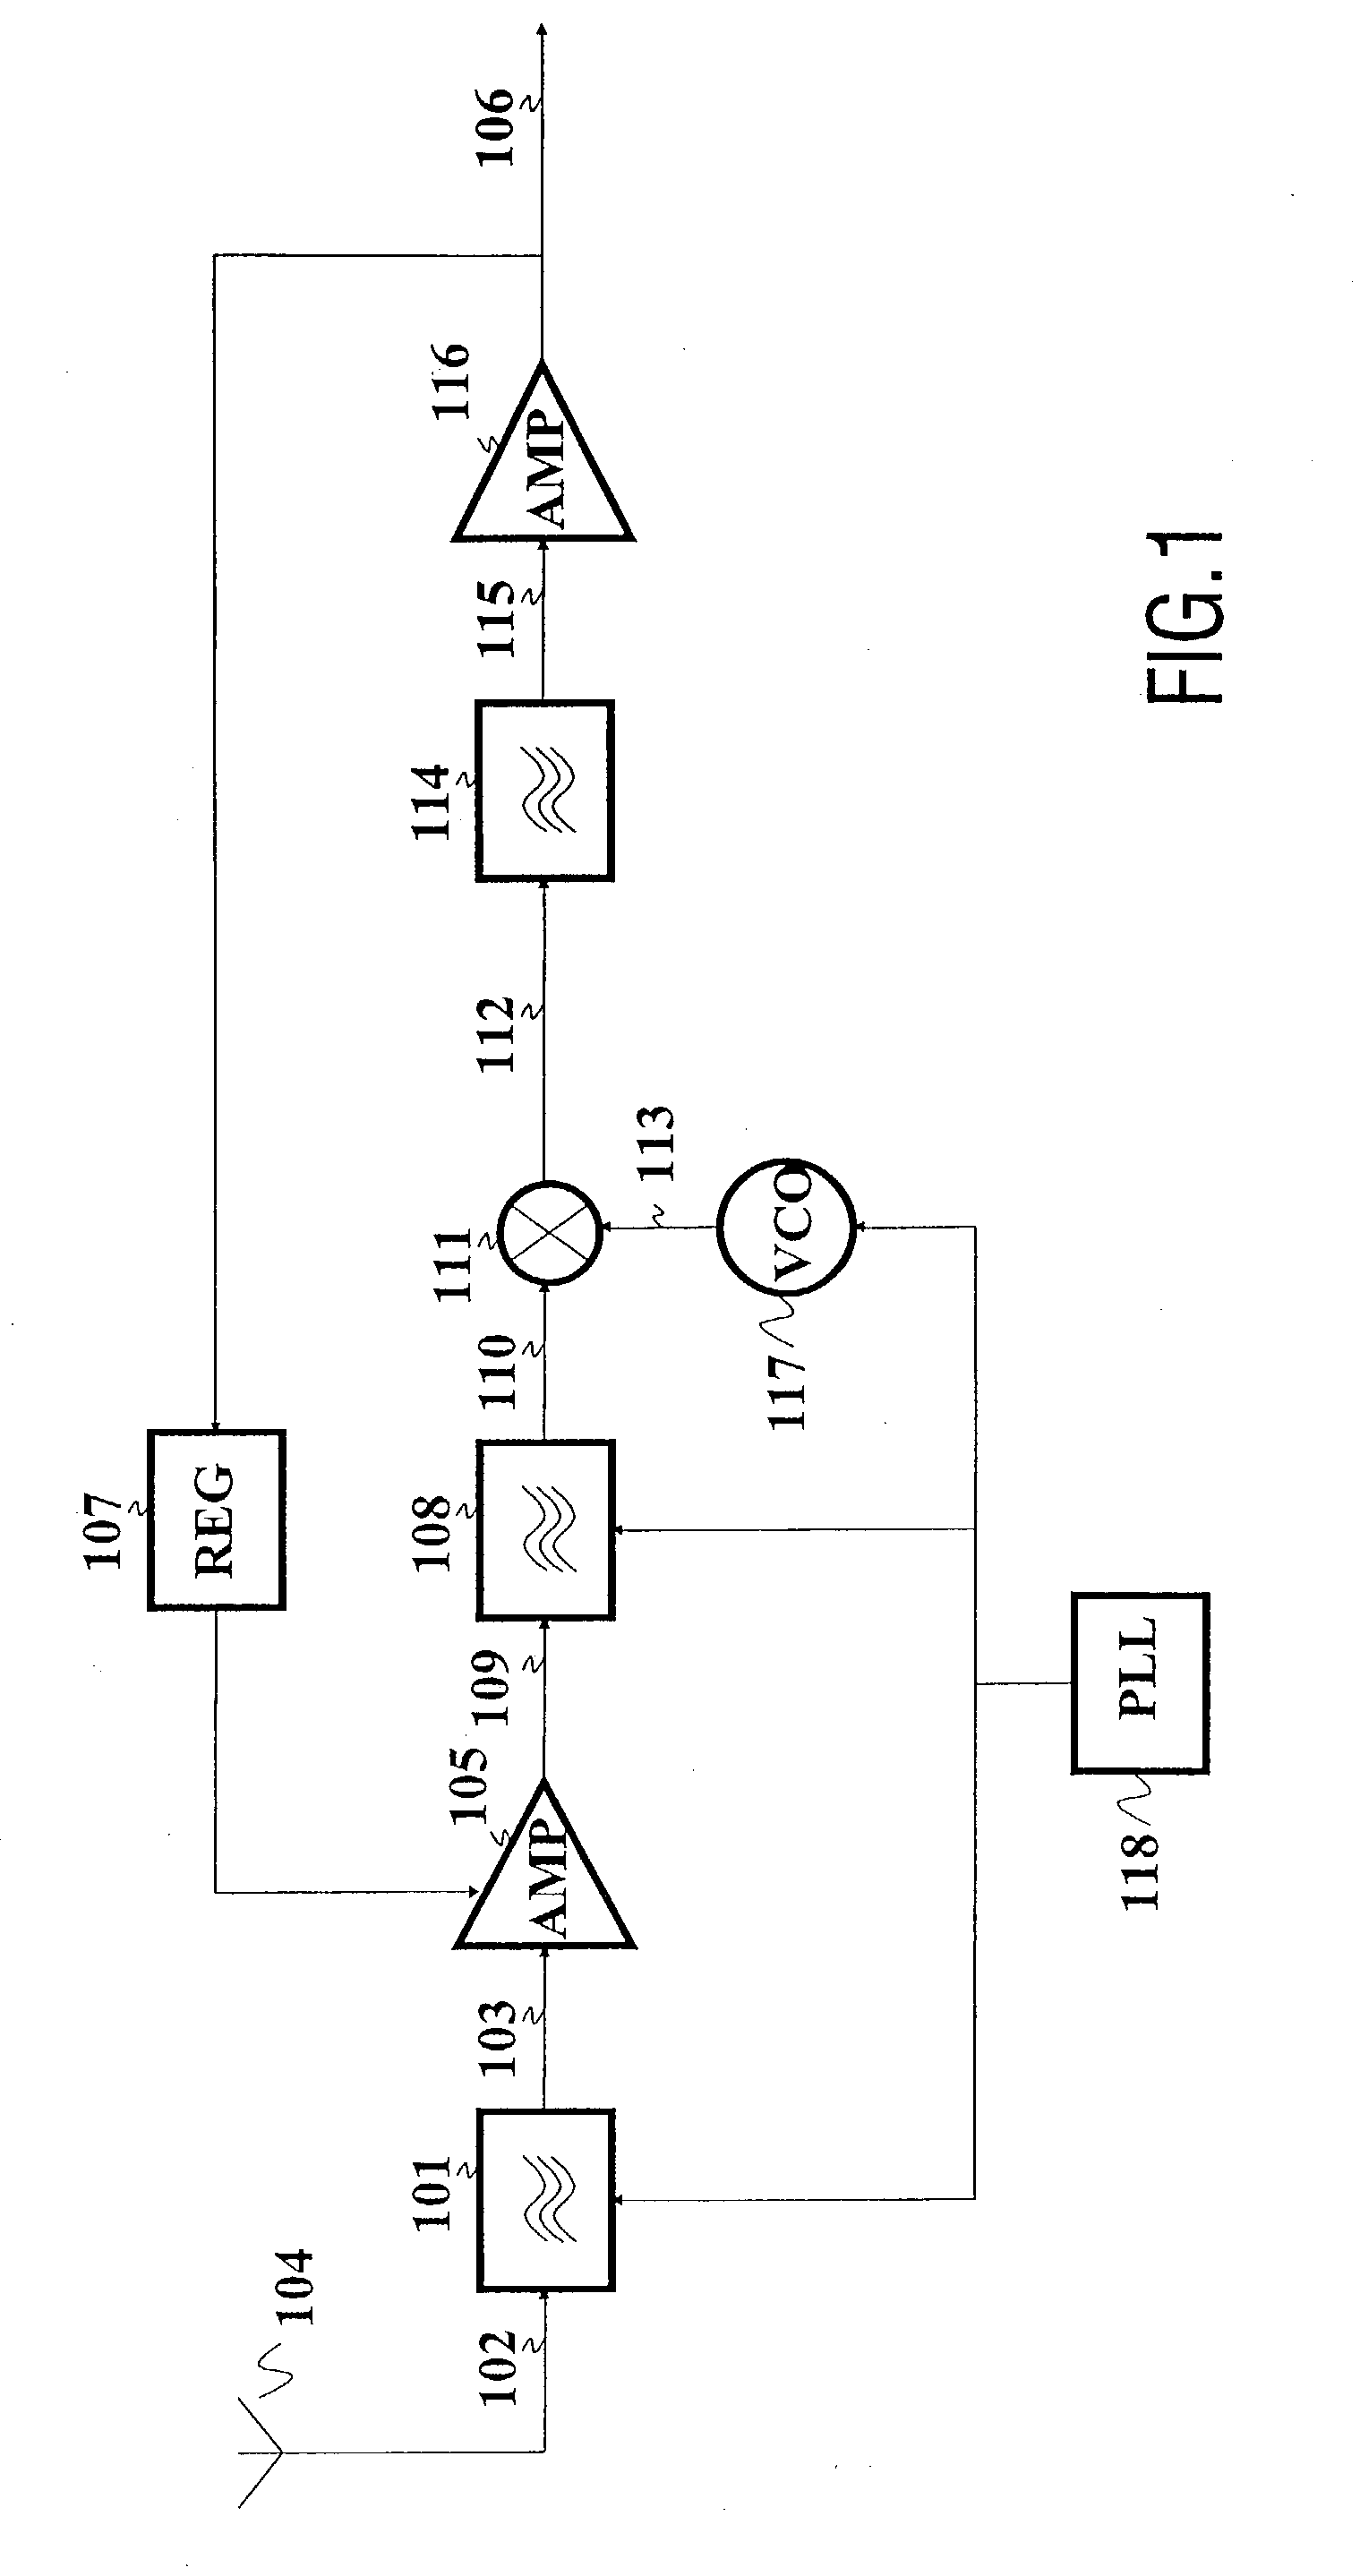 Tuner comprising a selective filter